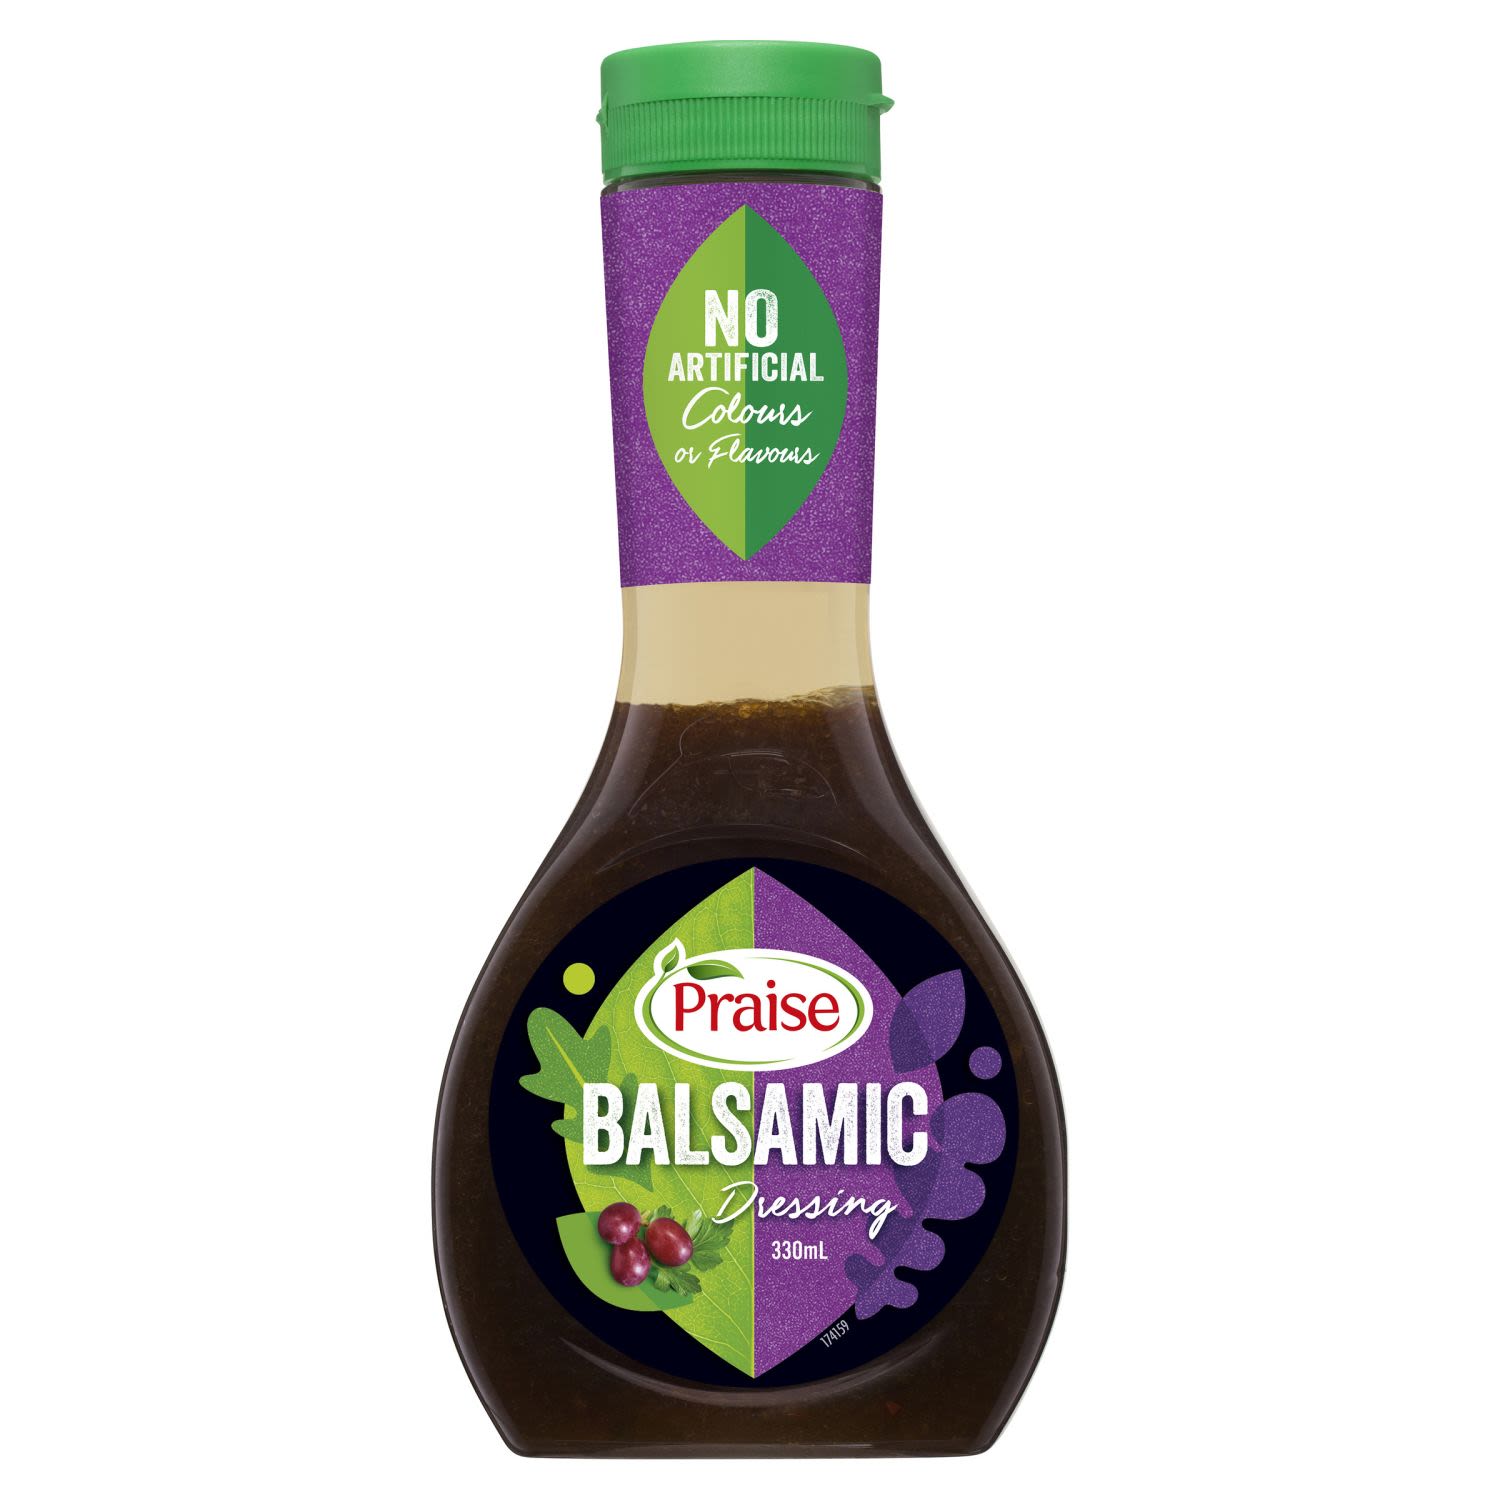 Praise Everyday Balsamic Dressing is a simple yet sophisticated dressing. Blended with balsamic vinegar and herbs, this dressing will spice up all your meals. Perfect for drizzling on salads and roast veggies.<br /> <br /><br />Allergen may be present: Soy|Sulphites <br /><br />Country of Origin: Made in Australia from at least 60% Australian ingredients